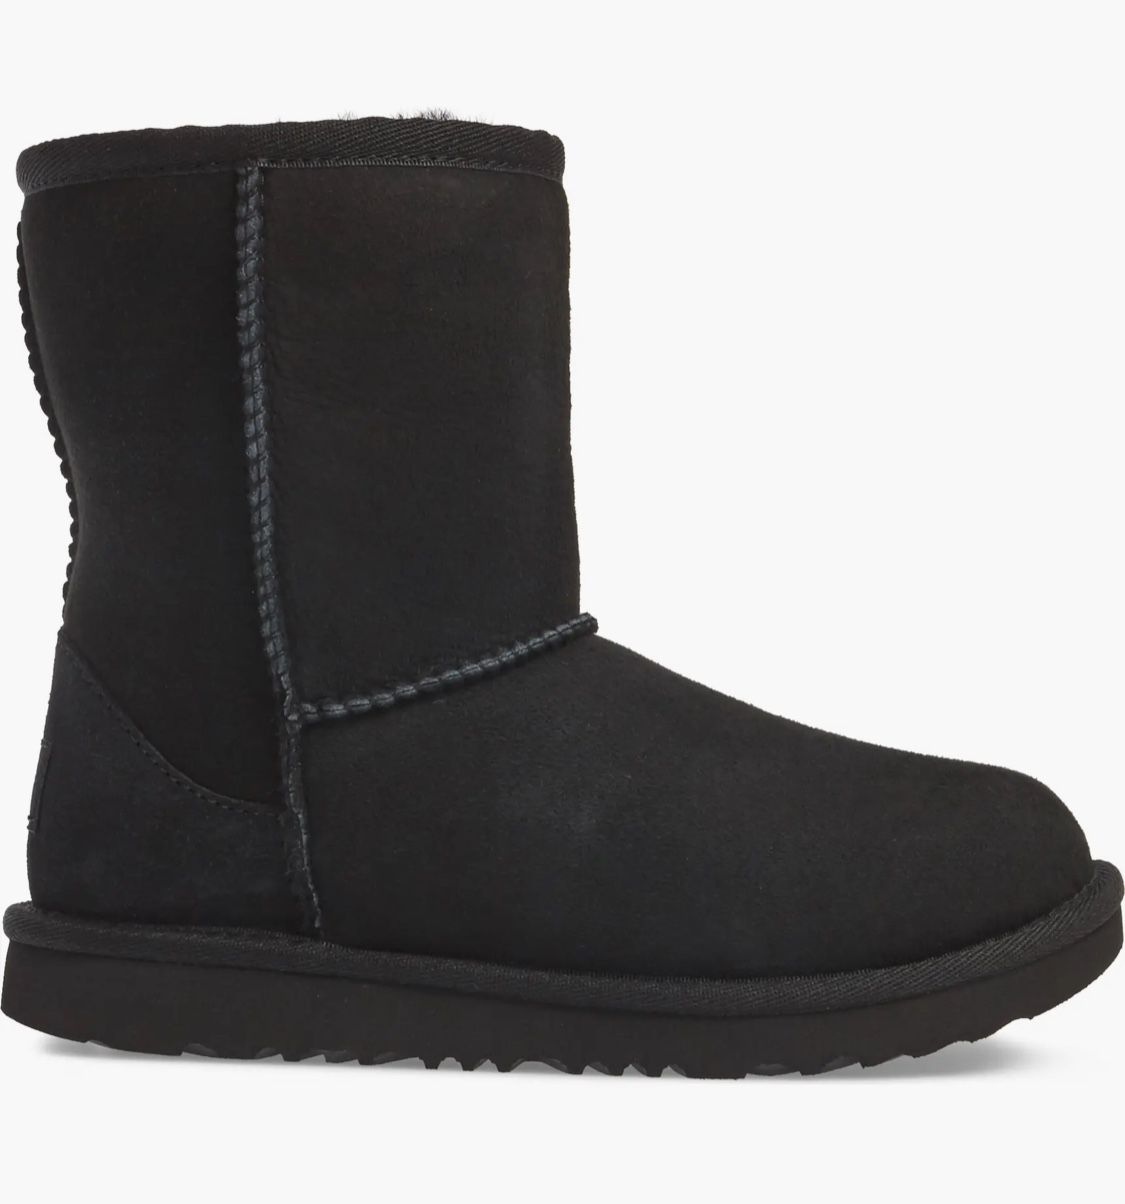 New UGGs Classic SHORT 2 BLACK Youth 4Y / 6 Women’s Wether Resistant 